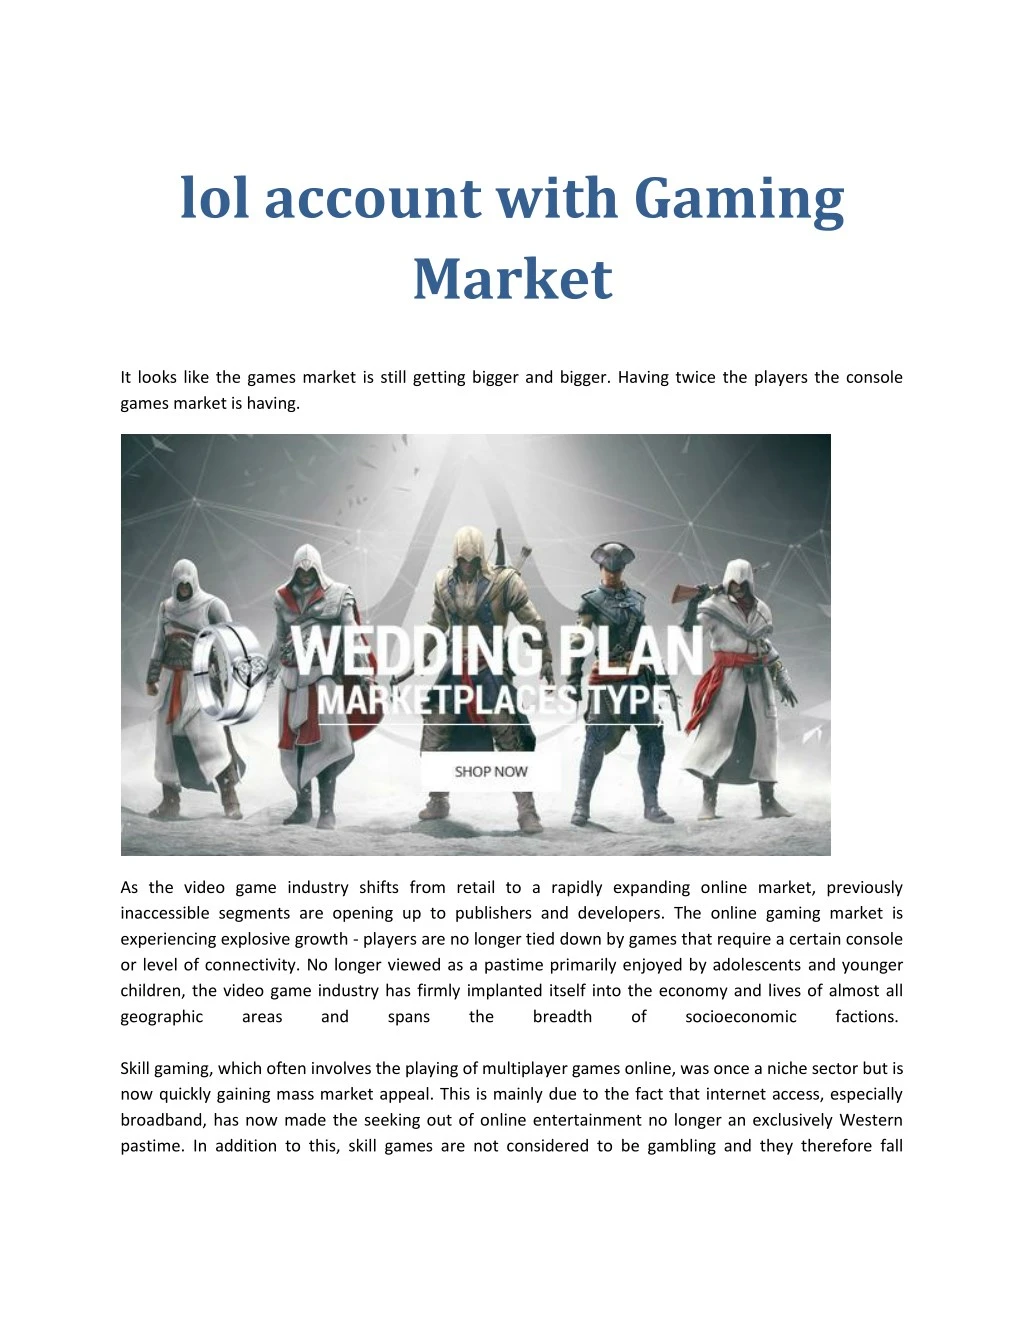 lol account with gaming market